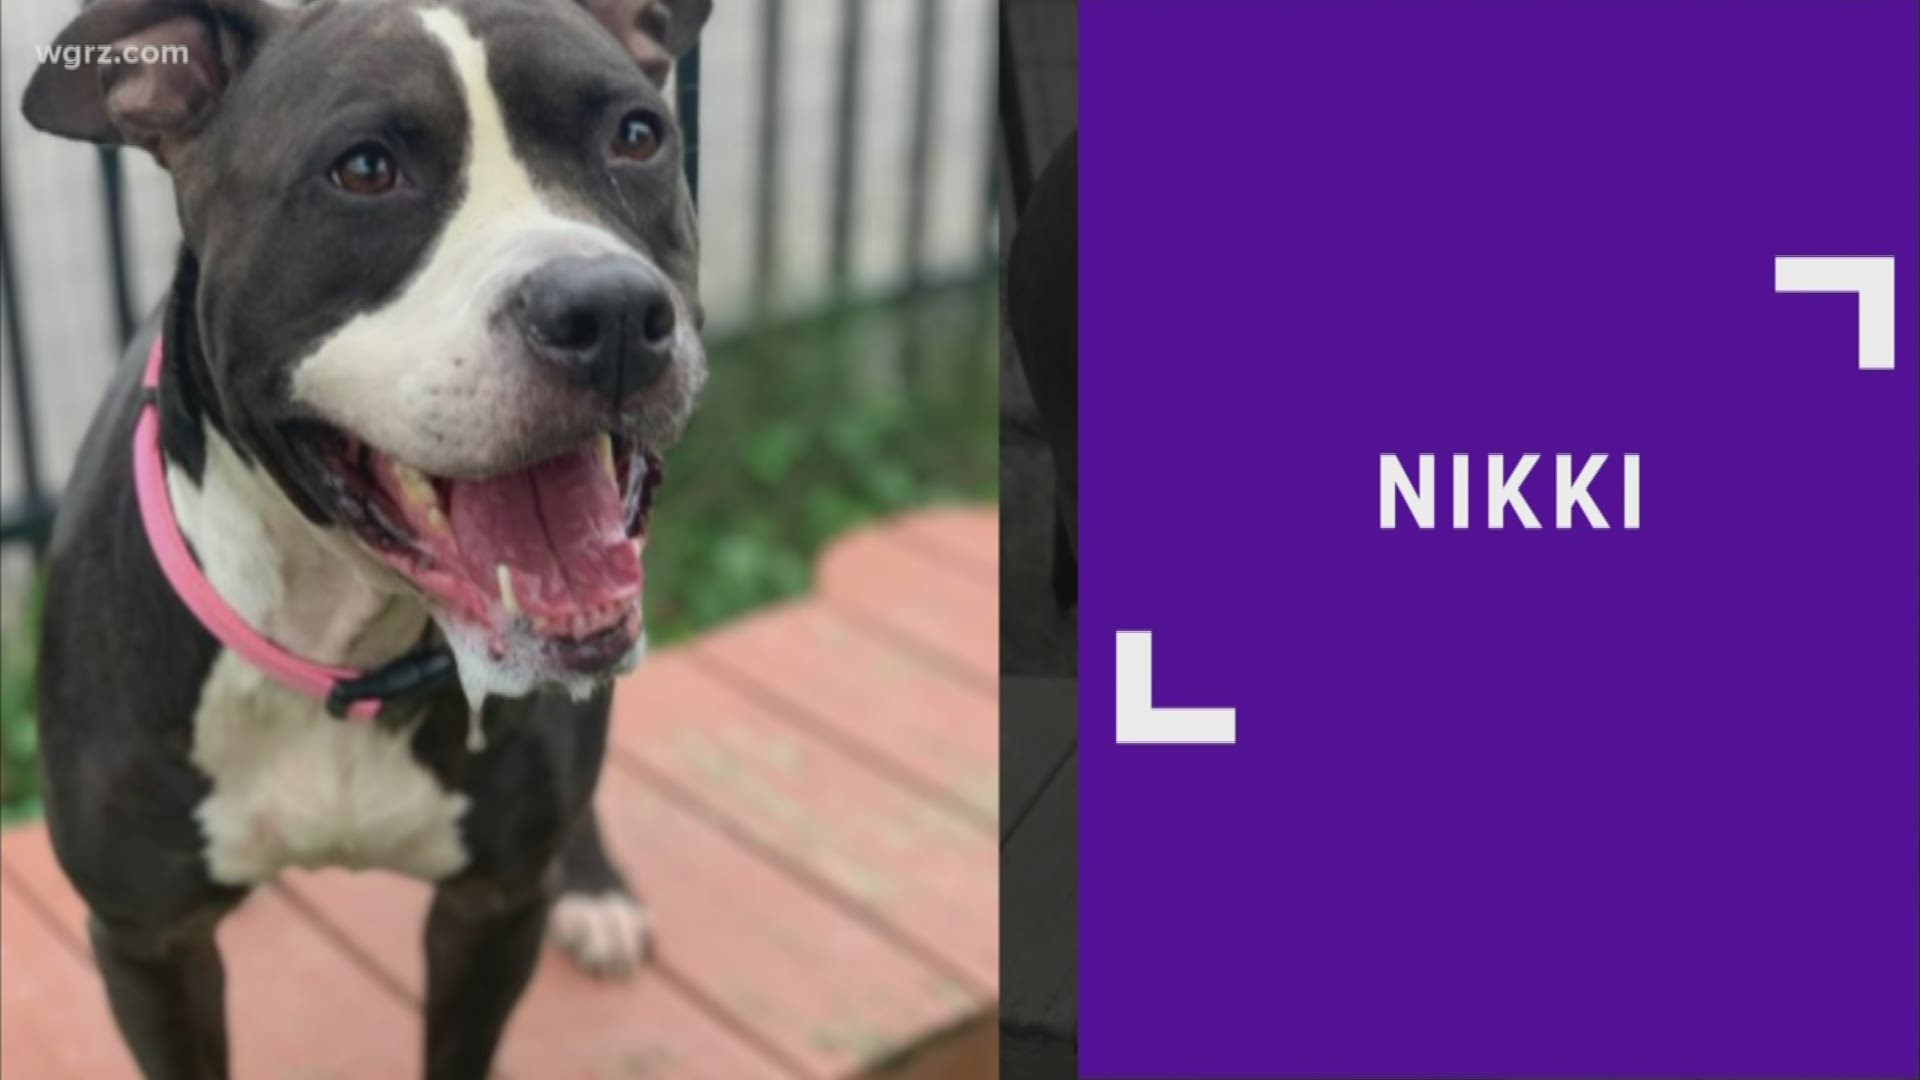 Nikki is a very friendly and lovable dog at the Buffalo Animal Shelter. She is very affectionate and loves attention, and is looking for a good home.